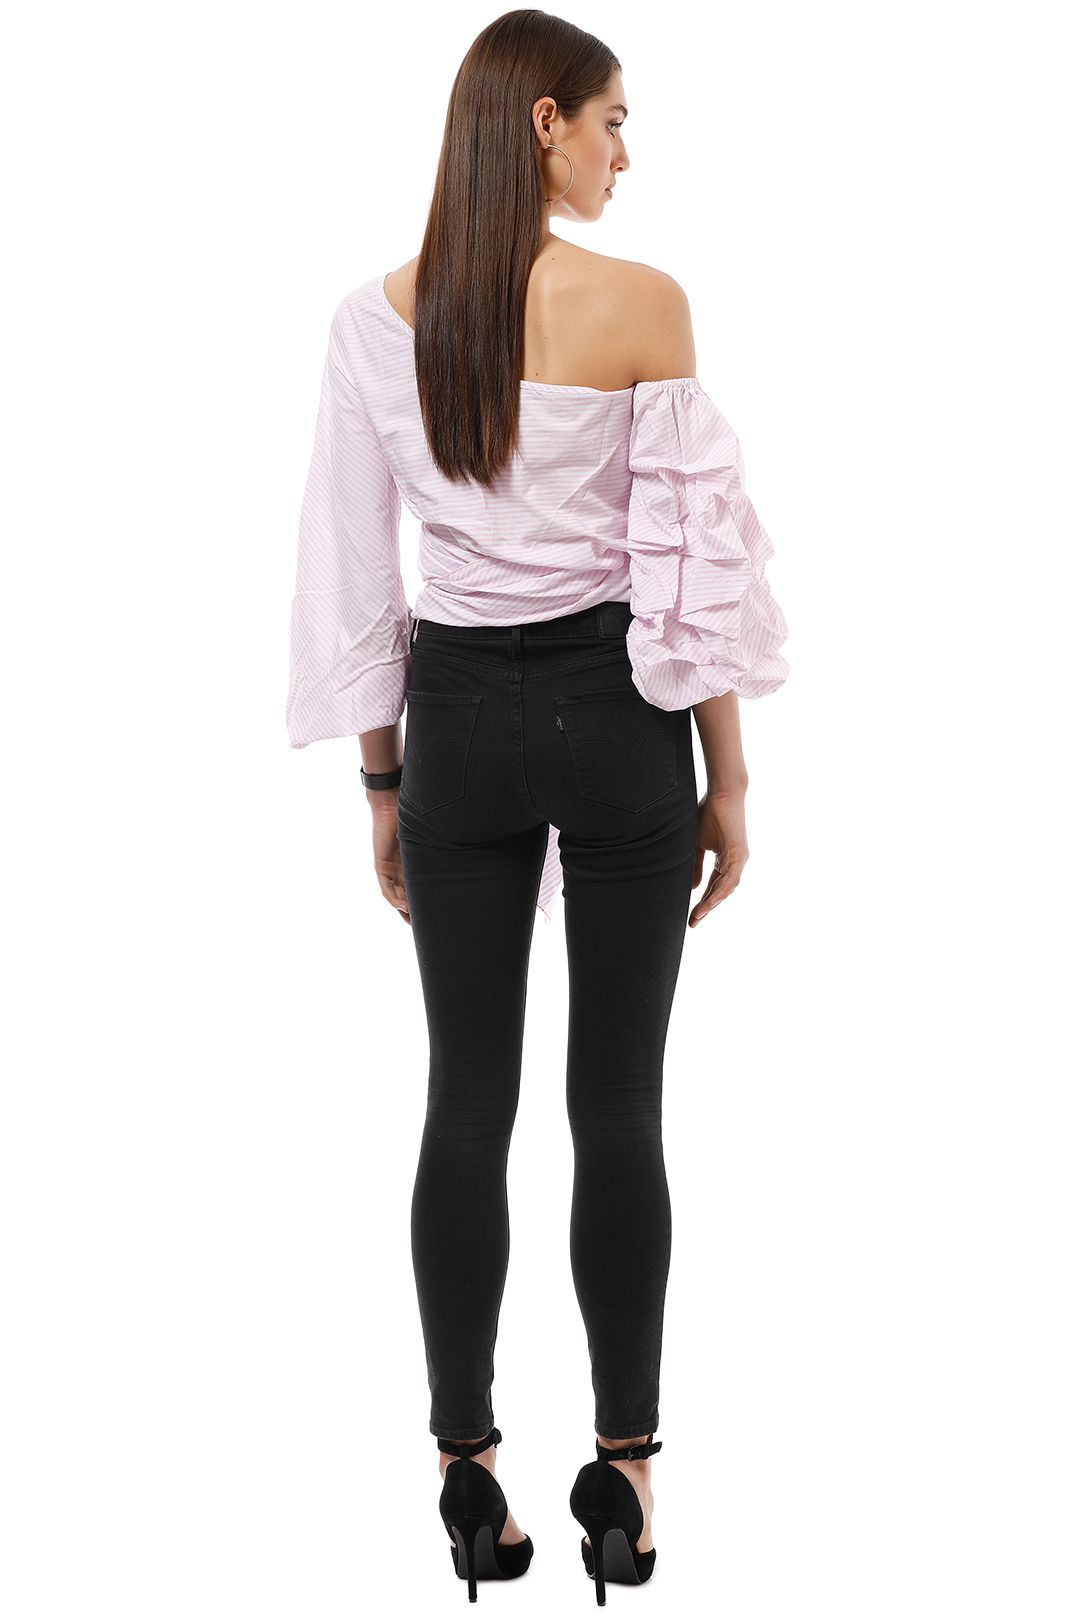 Maurie and Eve - Gabine Blouse - Pink - Back